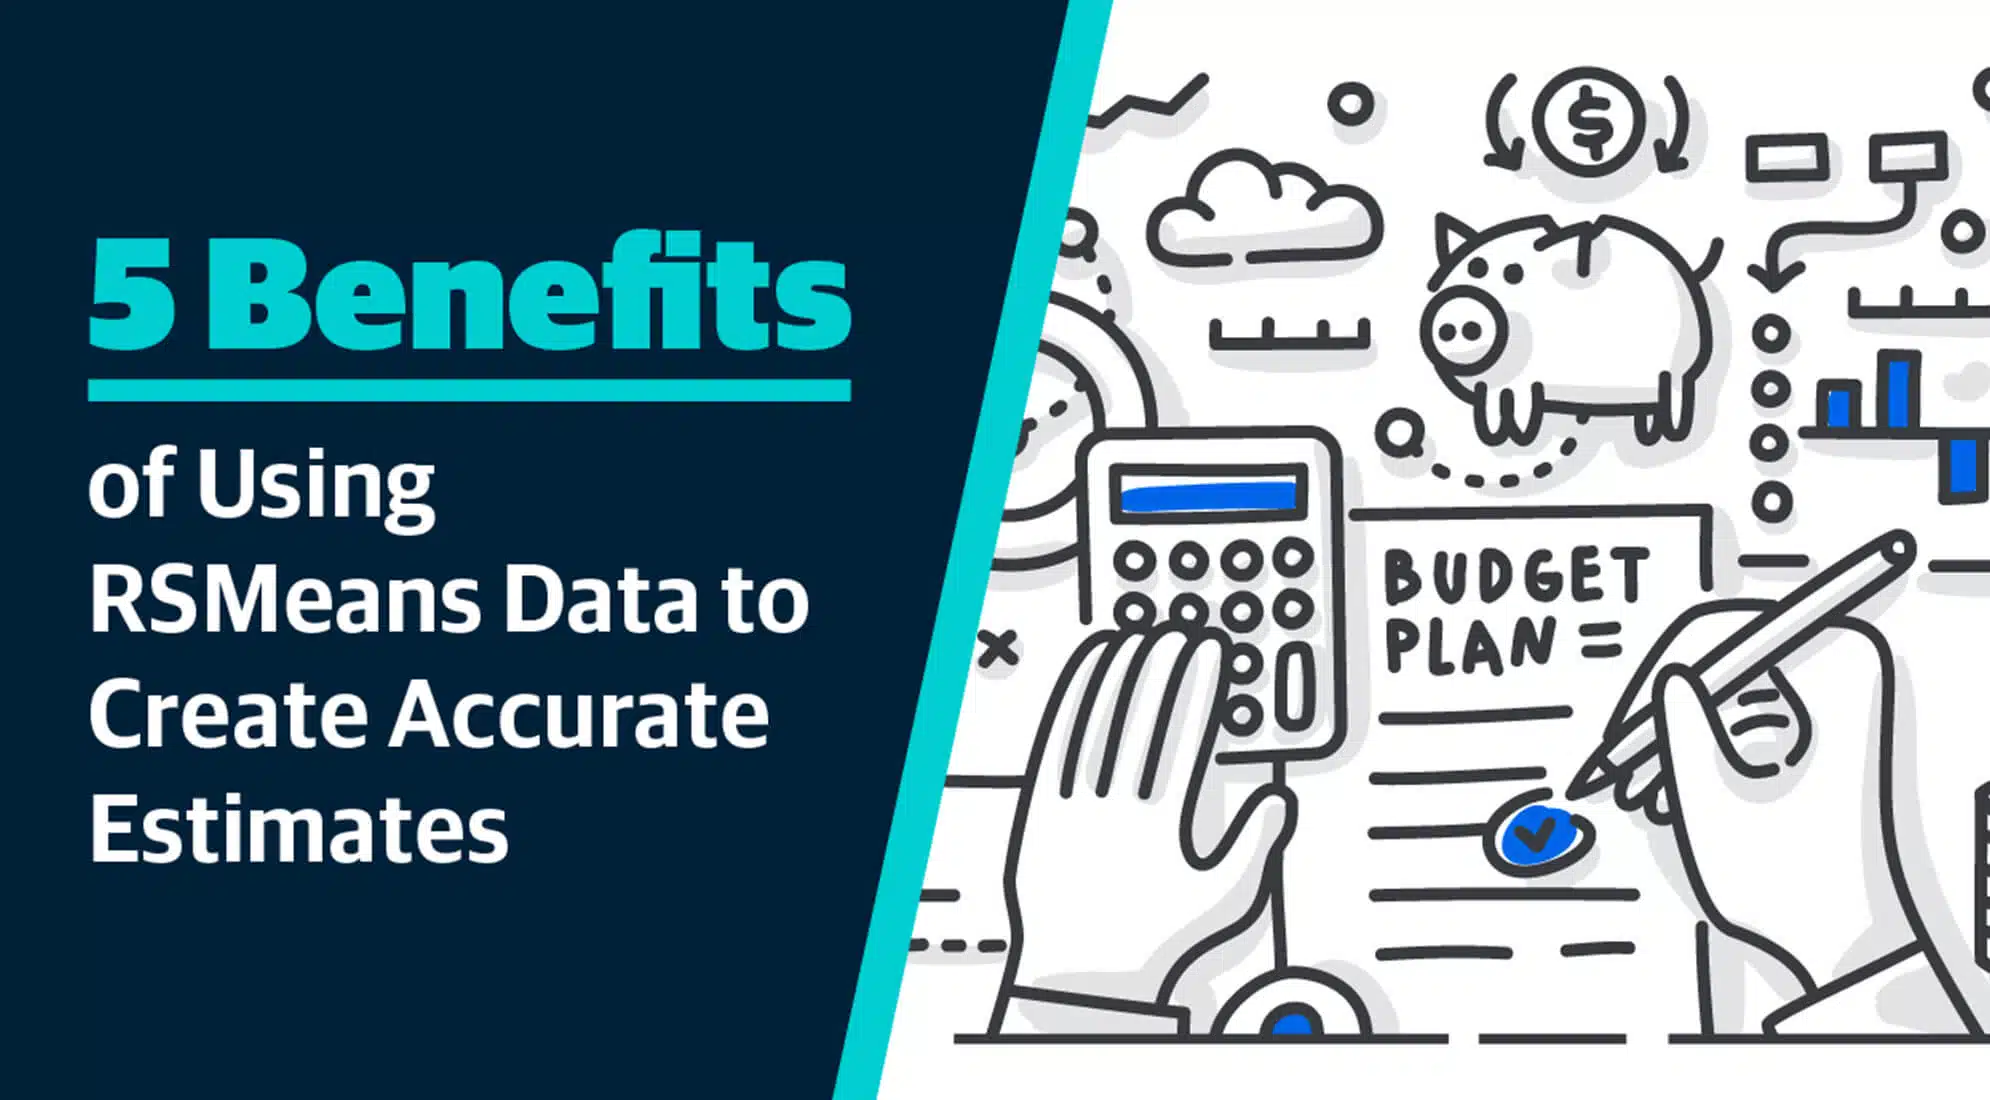 5 Benefits of Using RSMeans Data to Create Accurate Estimates 3